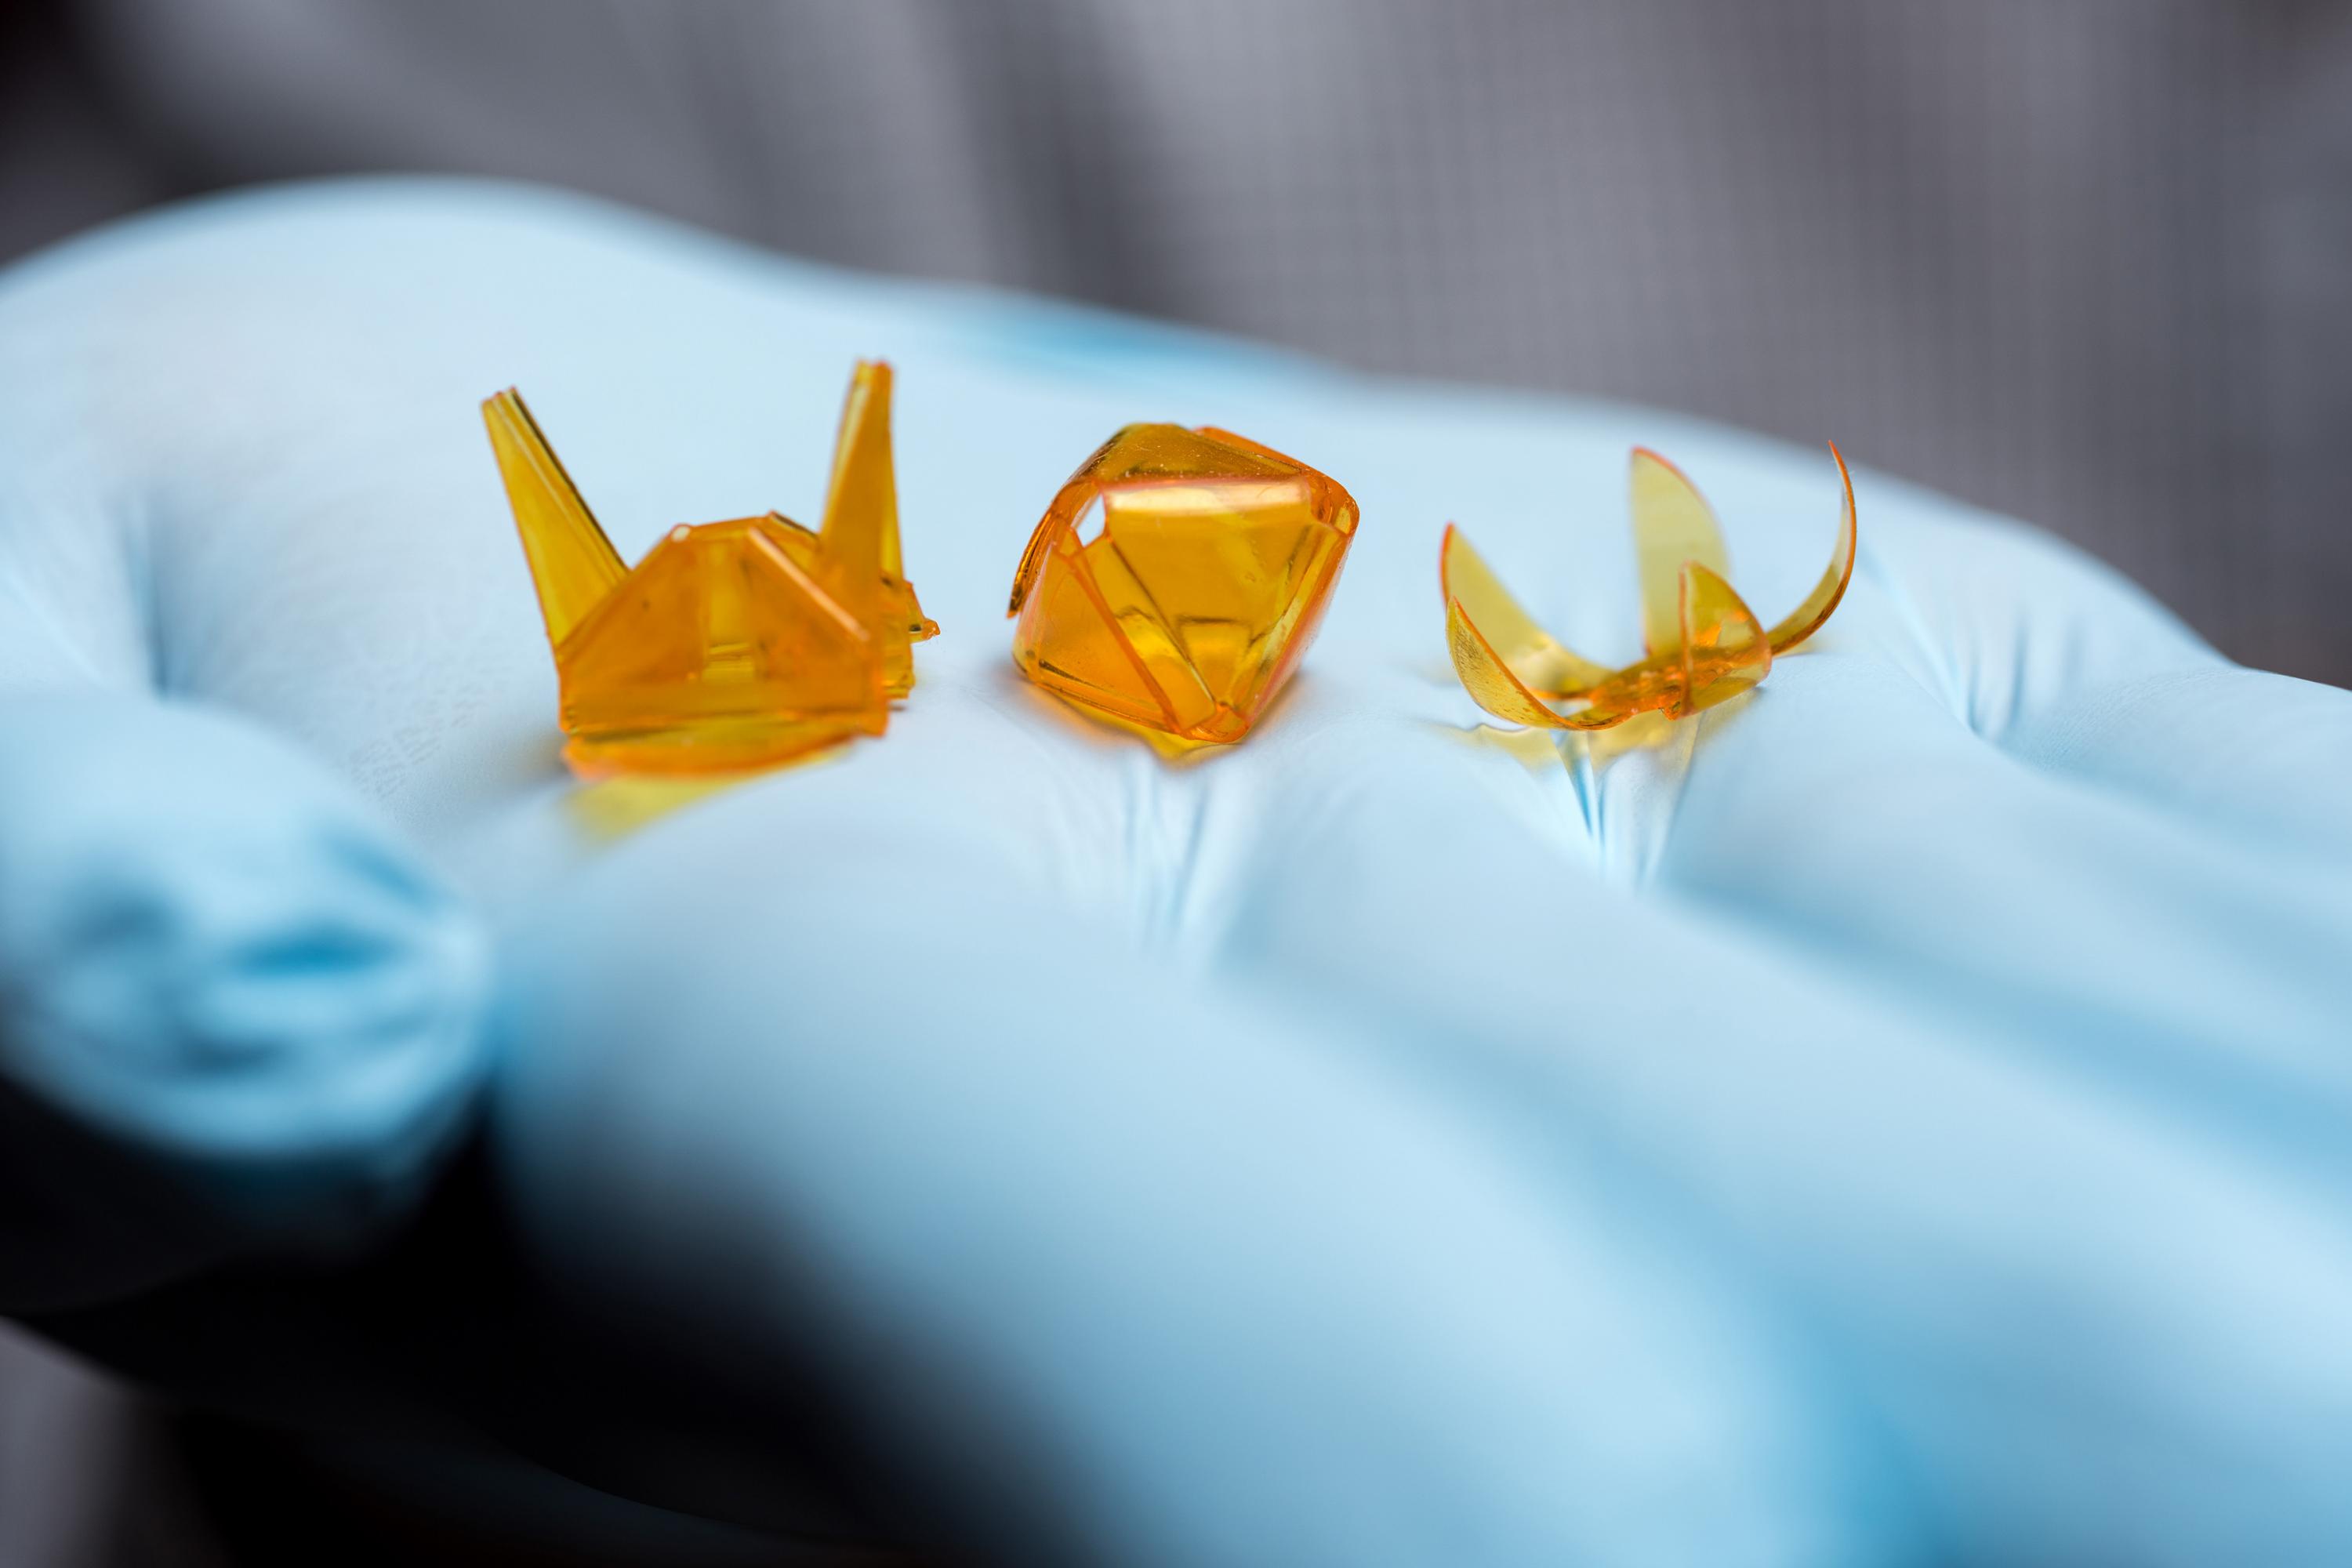 A new technique for producing self-folding three-dimensional origami structures from photo-curable liquid polymer materials created these tiny samples, held in a hand for size comparison. (Credit: Rob Felt, Georgia Tech)